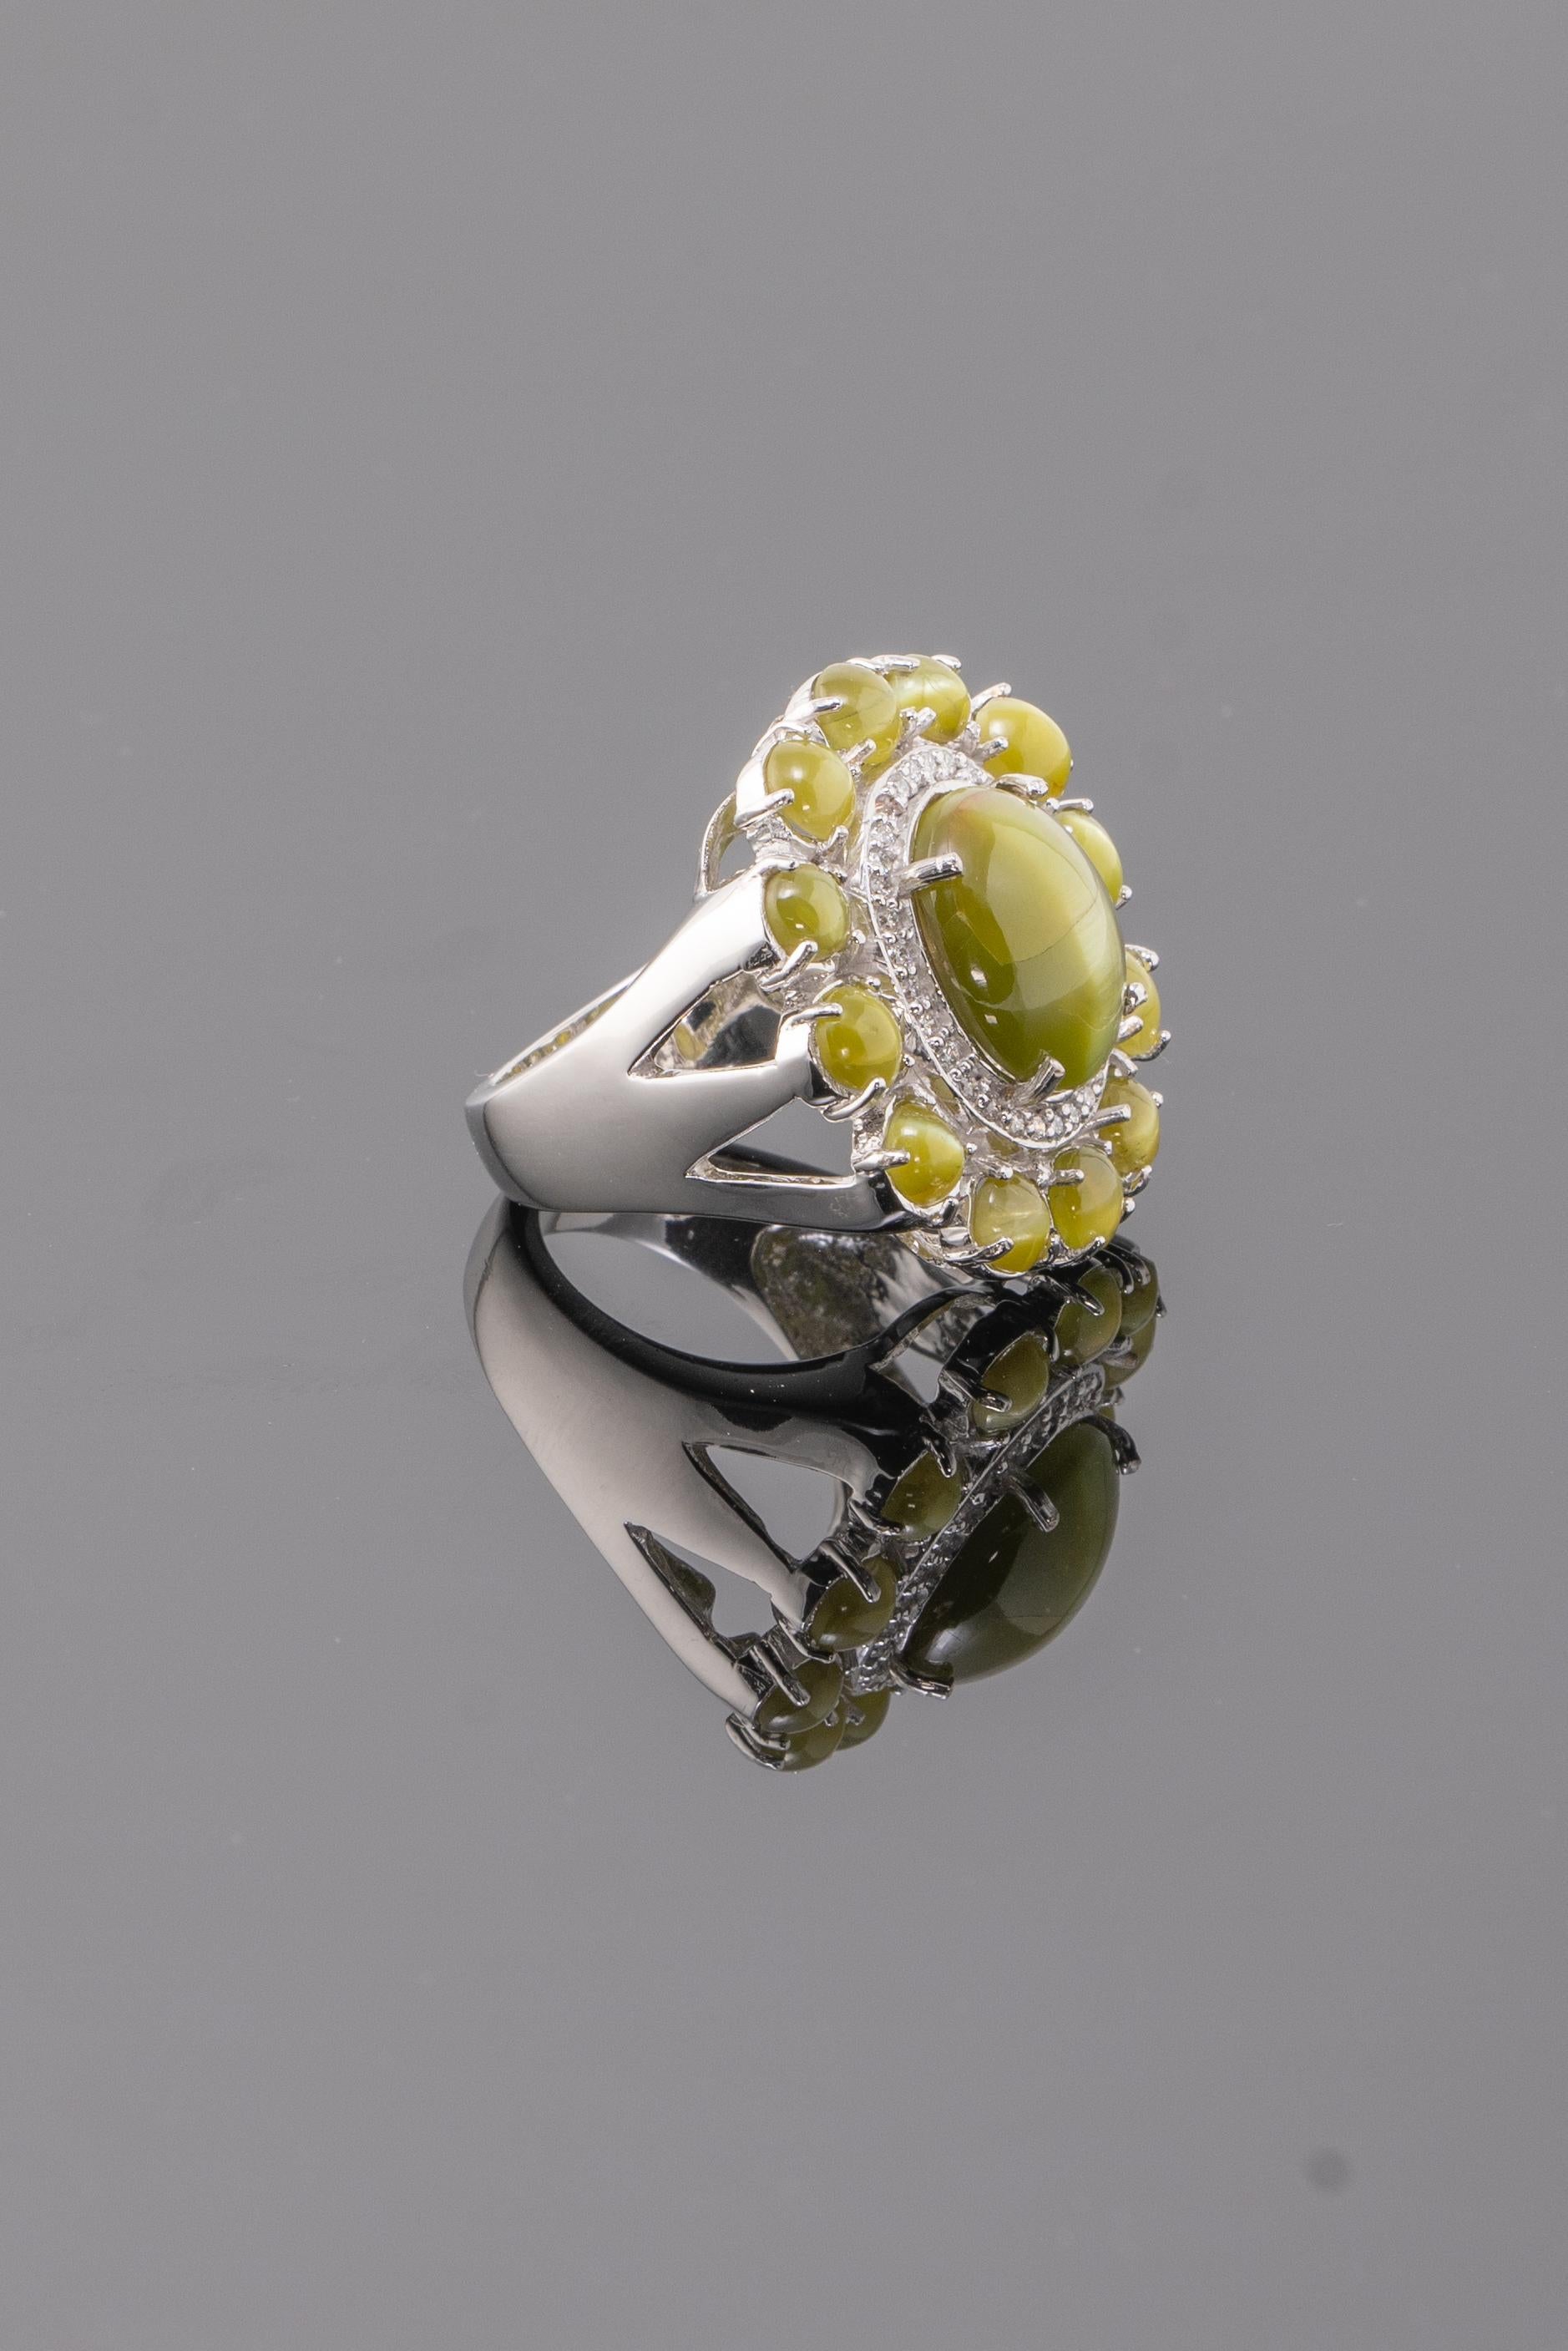 A very unique 15.70 carat Chrysoberyl Cats-Eye and 0.31 carat Diamond cluster cocktail ring, set in 15.15 grams solid 18K White Gold. Currently sized at US 7, can be resized. 
Message for more information and video! 
We accept returns. Free shipping